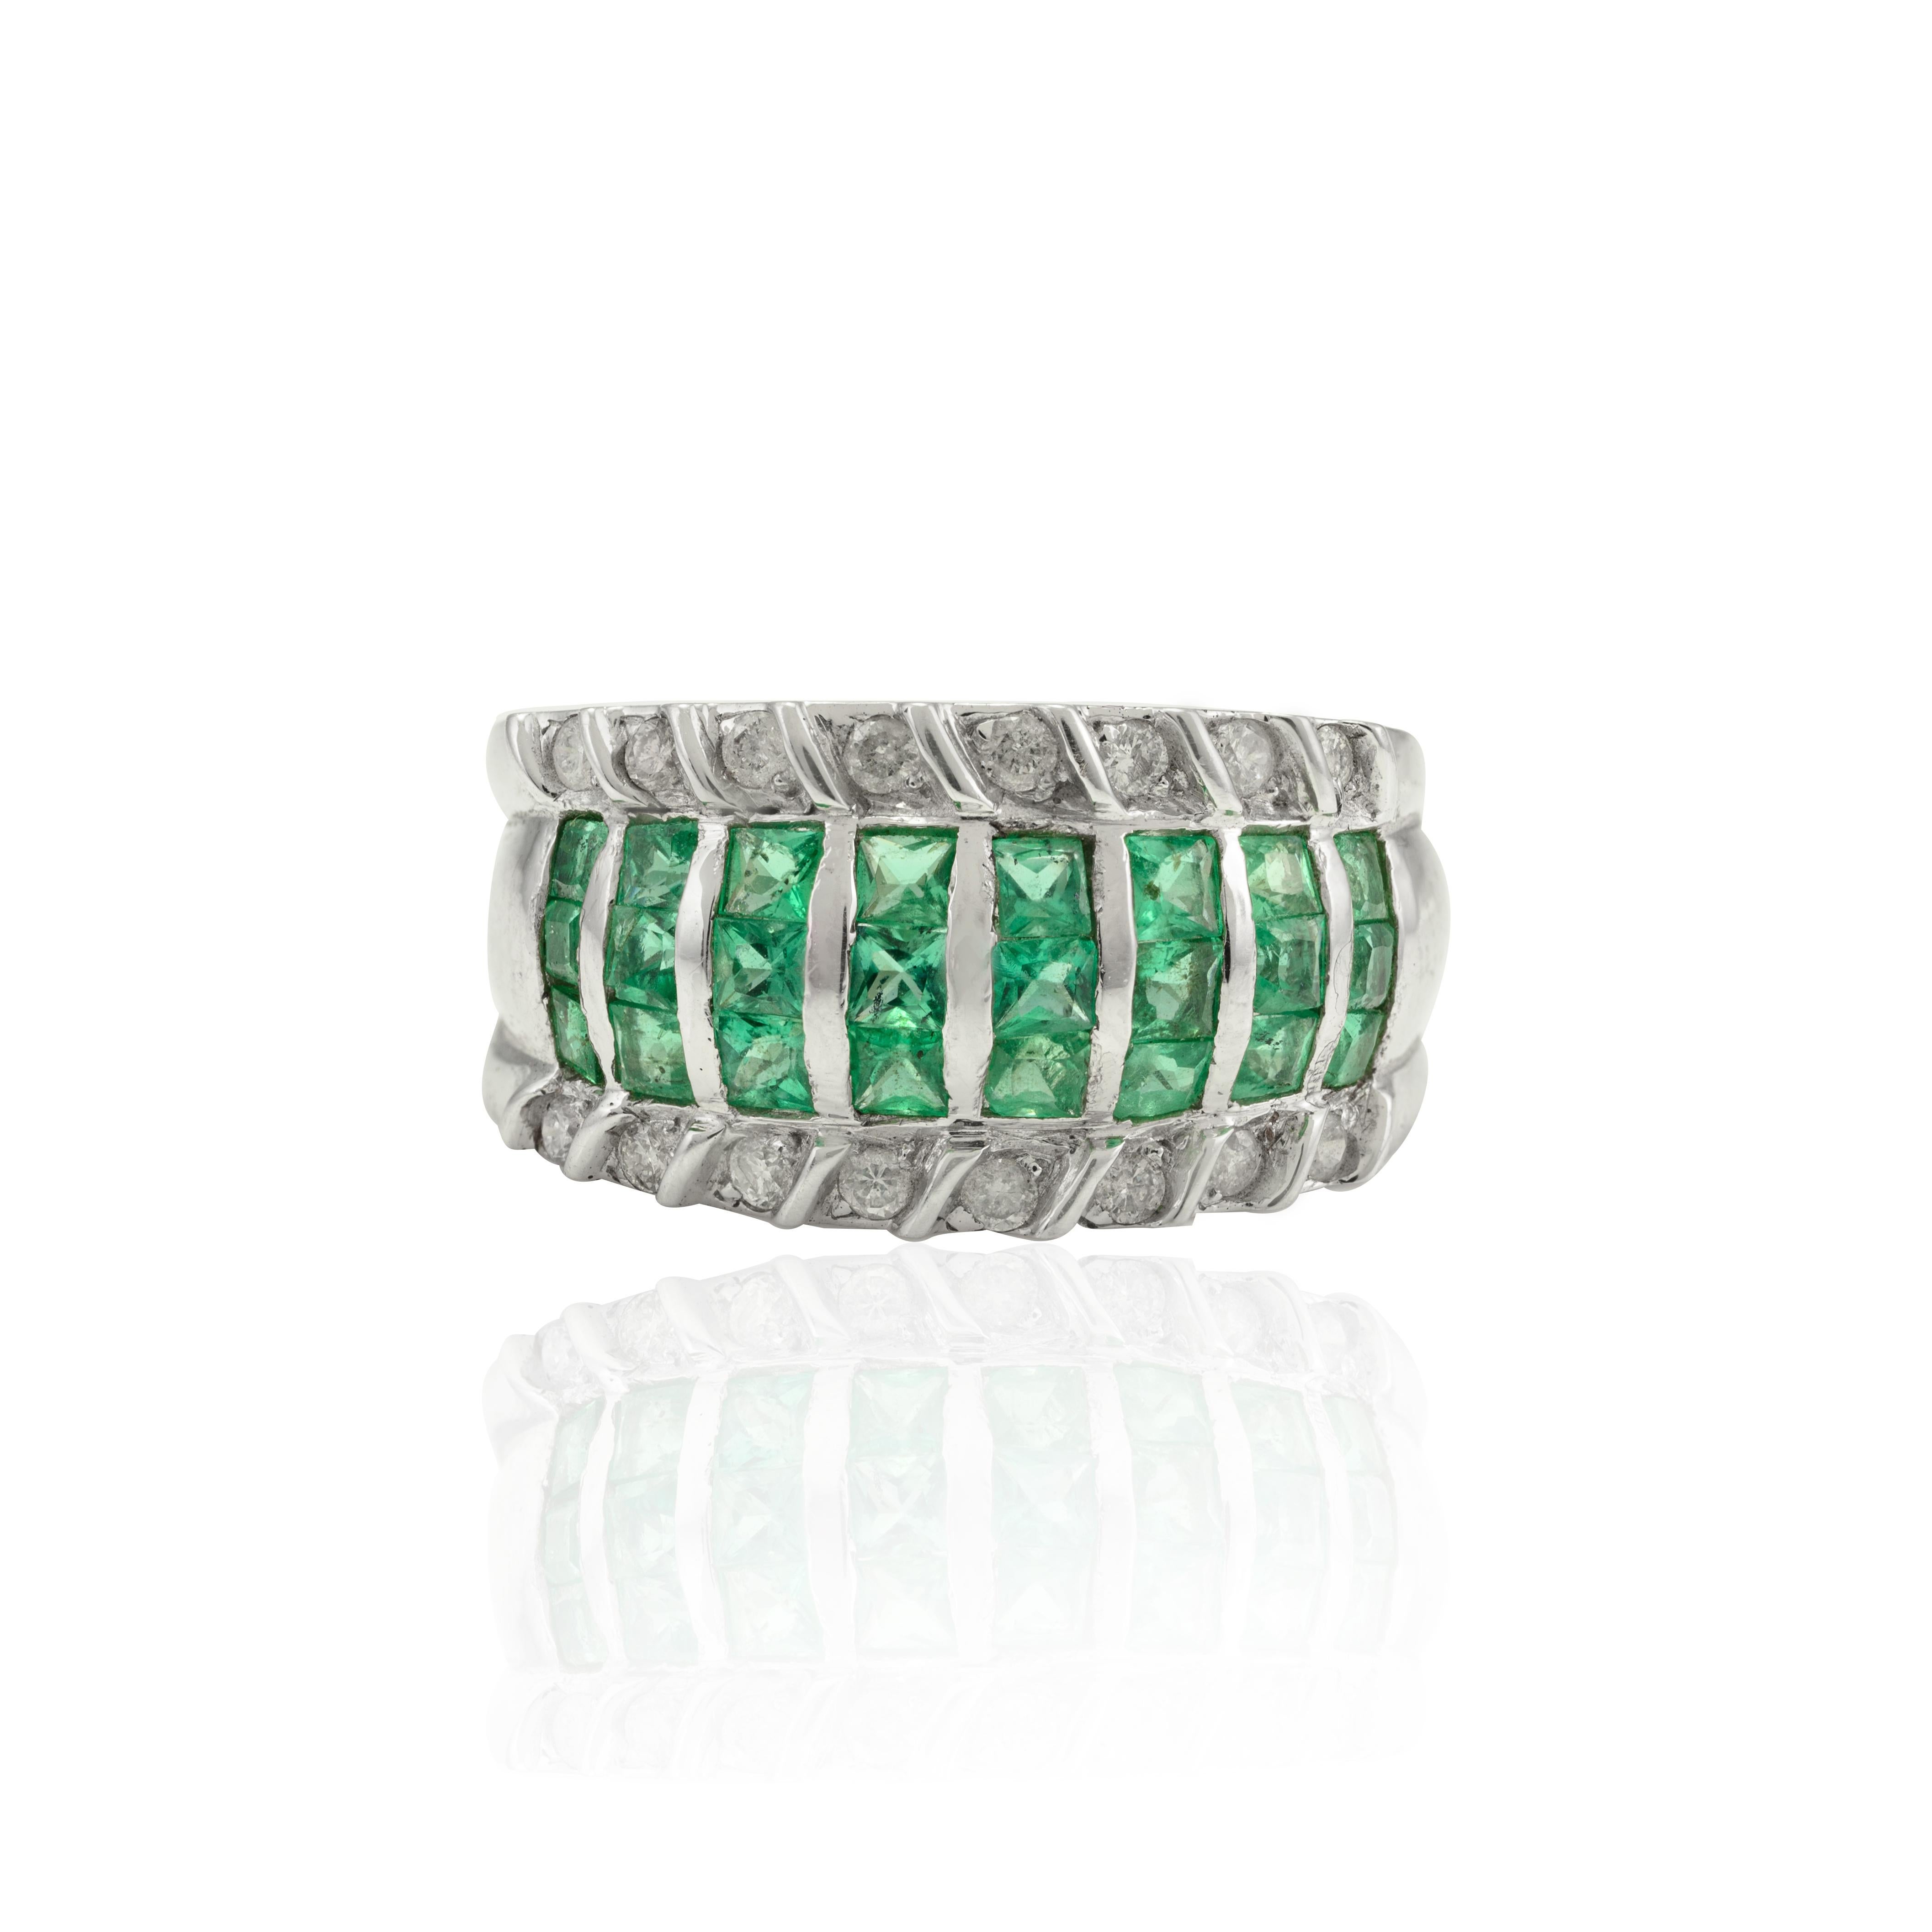 For Sale:  18k Solid White Gold 1 Carat Emerald and Diamond Wide Band Ring, Mens Jewelry 6